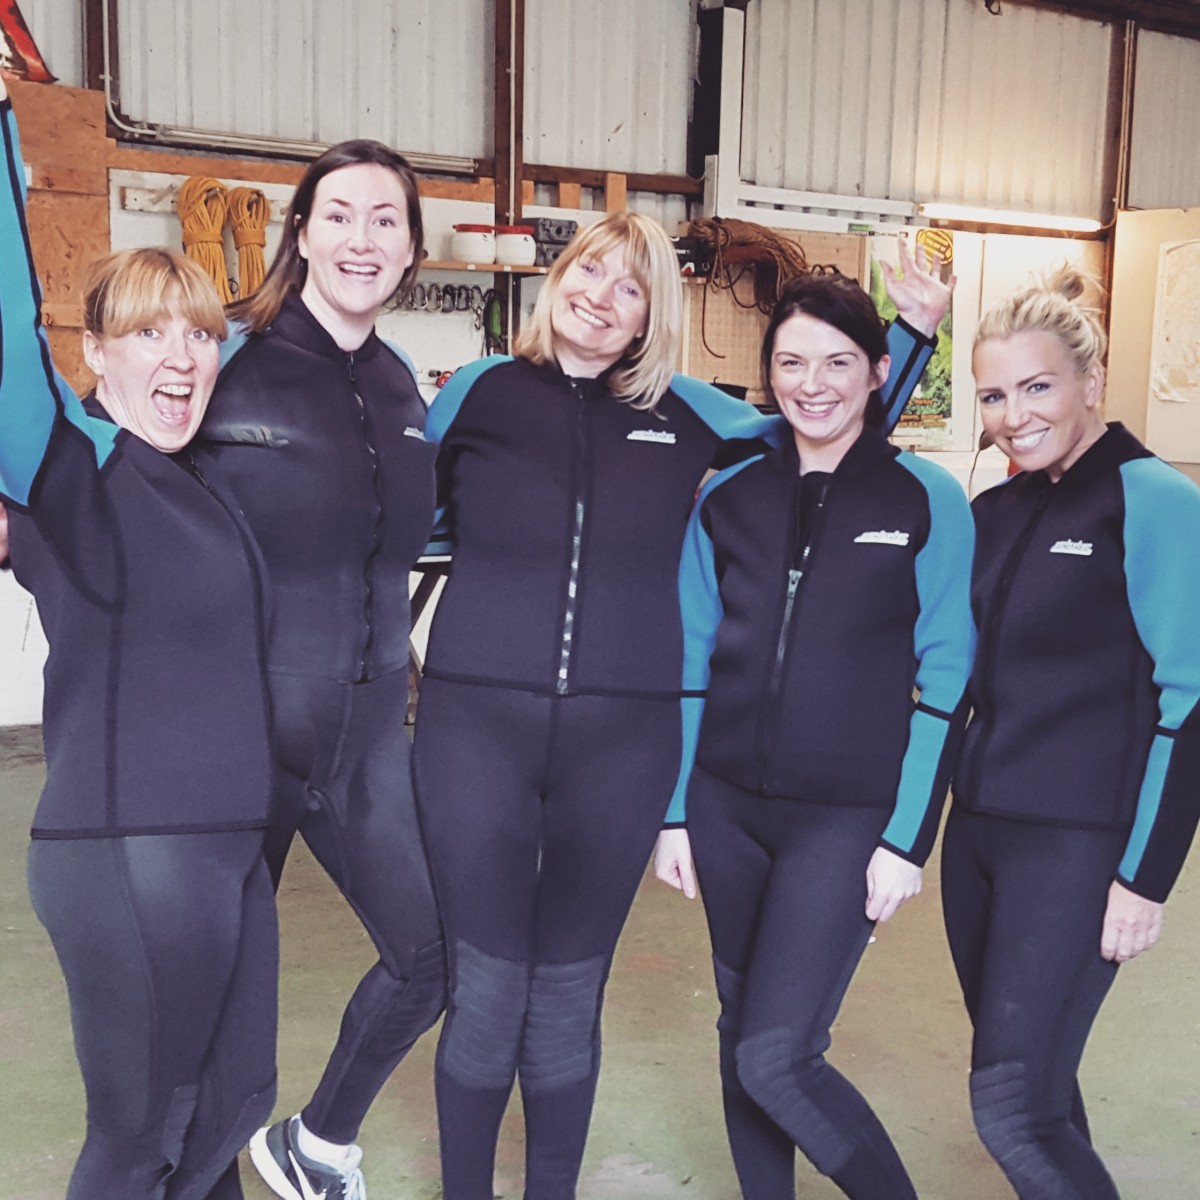 DAY OUT REVIEW - Wetsuits